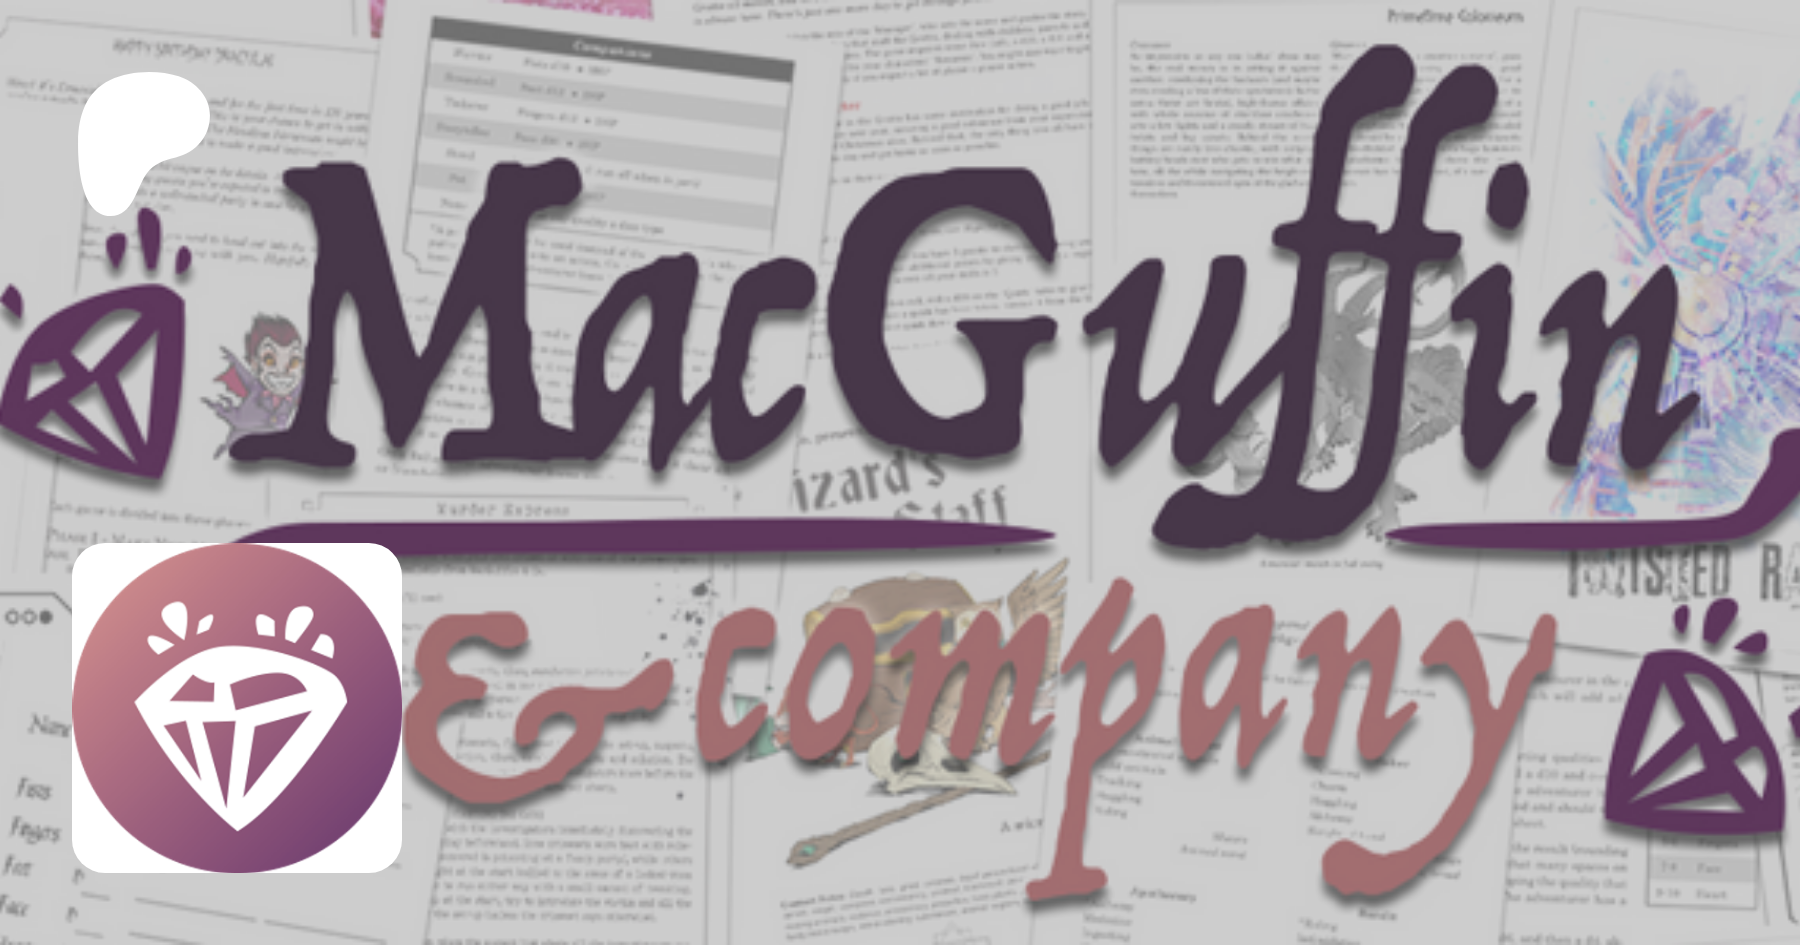 Free Games — MacGuffin & Co.